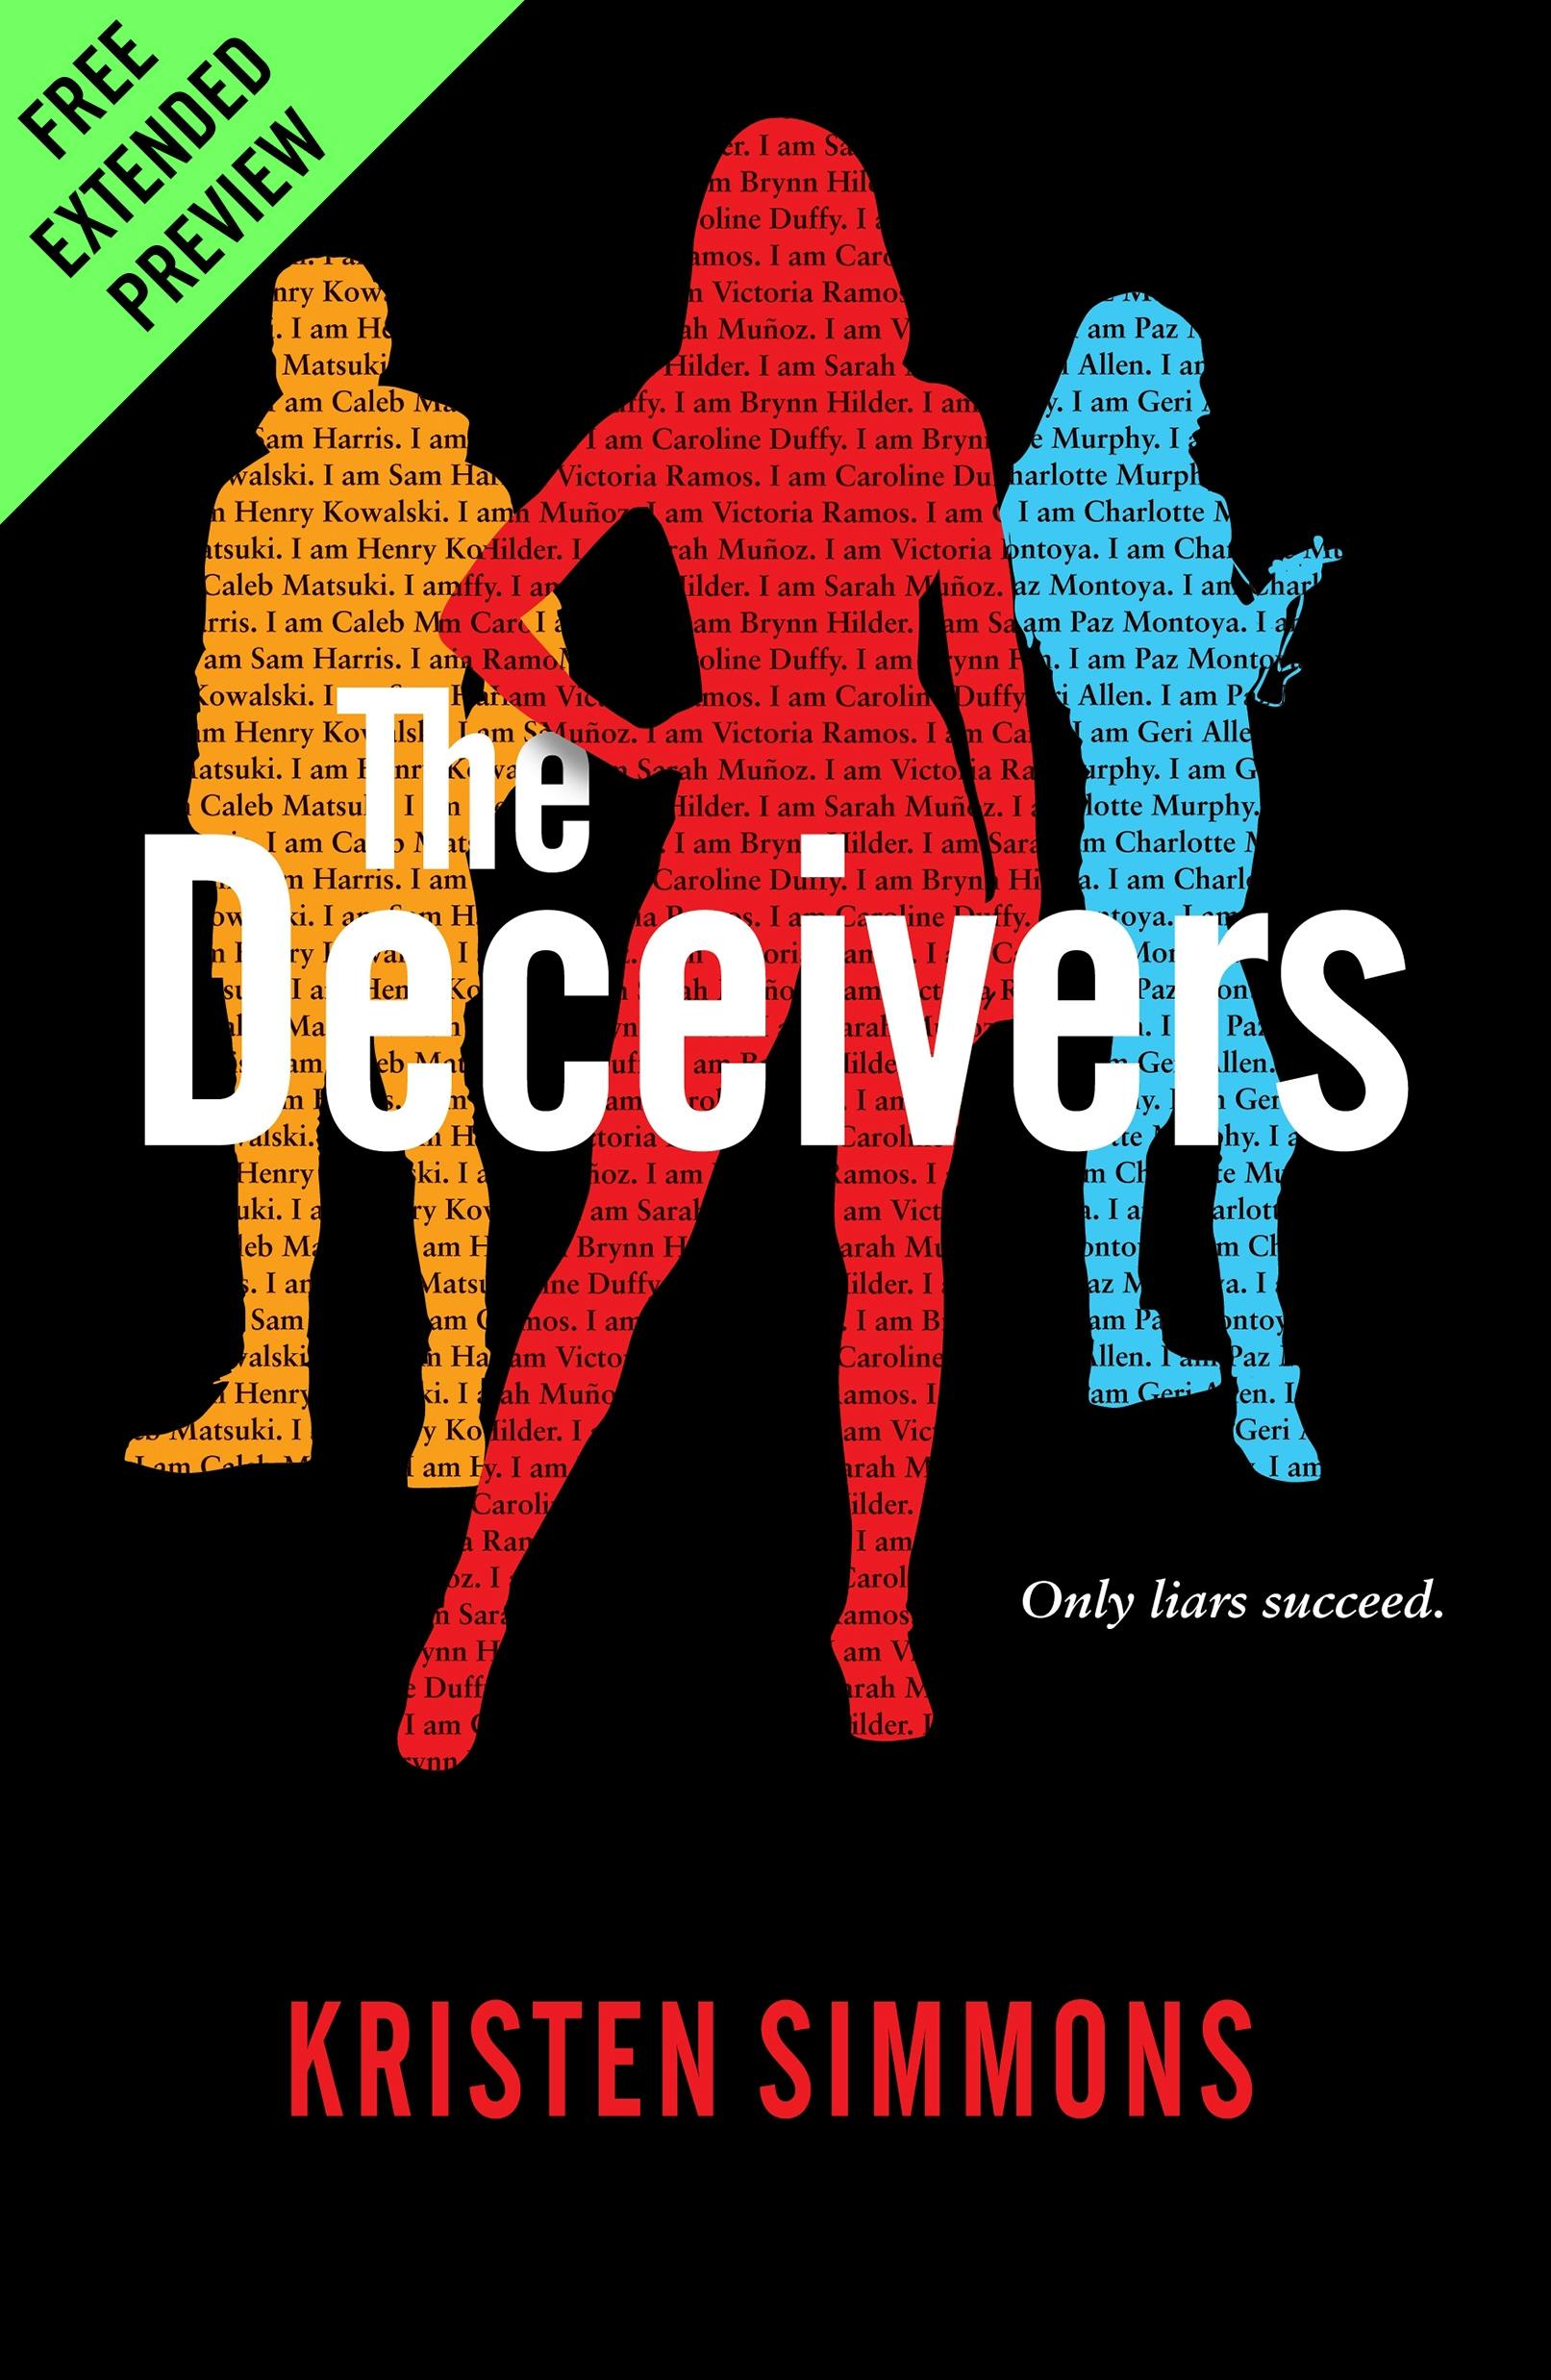 Cover for the book titled as: The Deceivers Sneak Peek